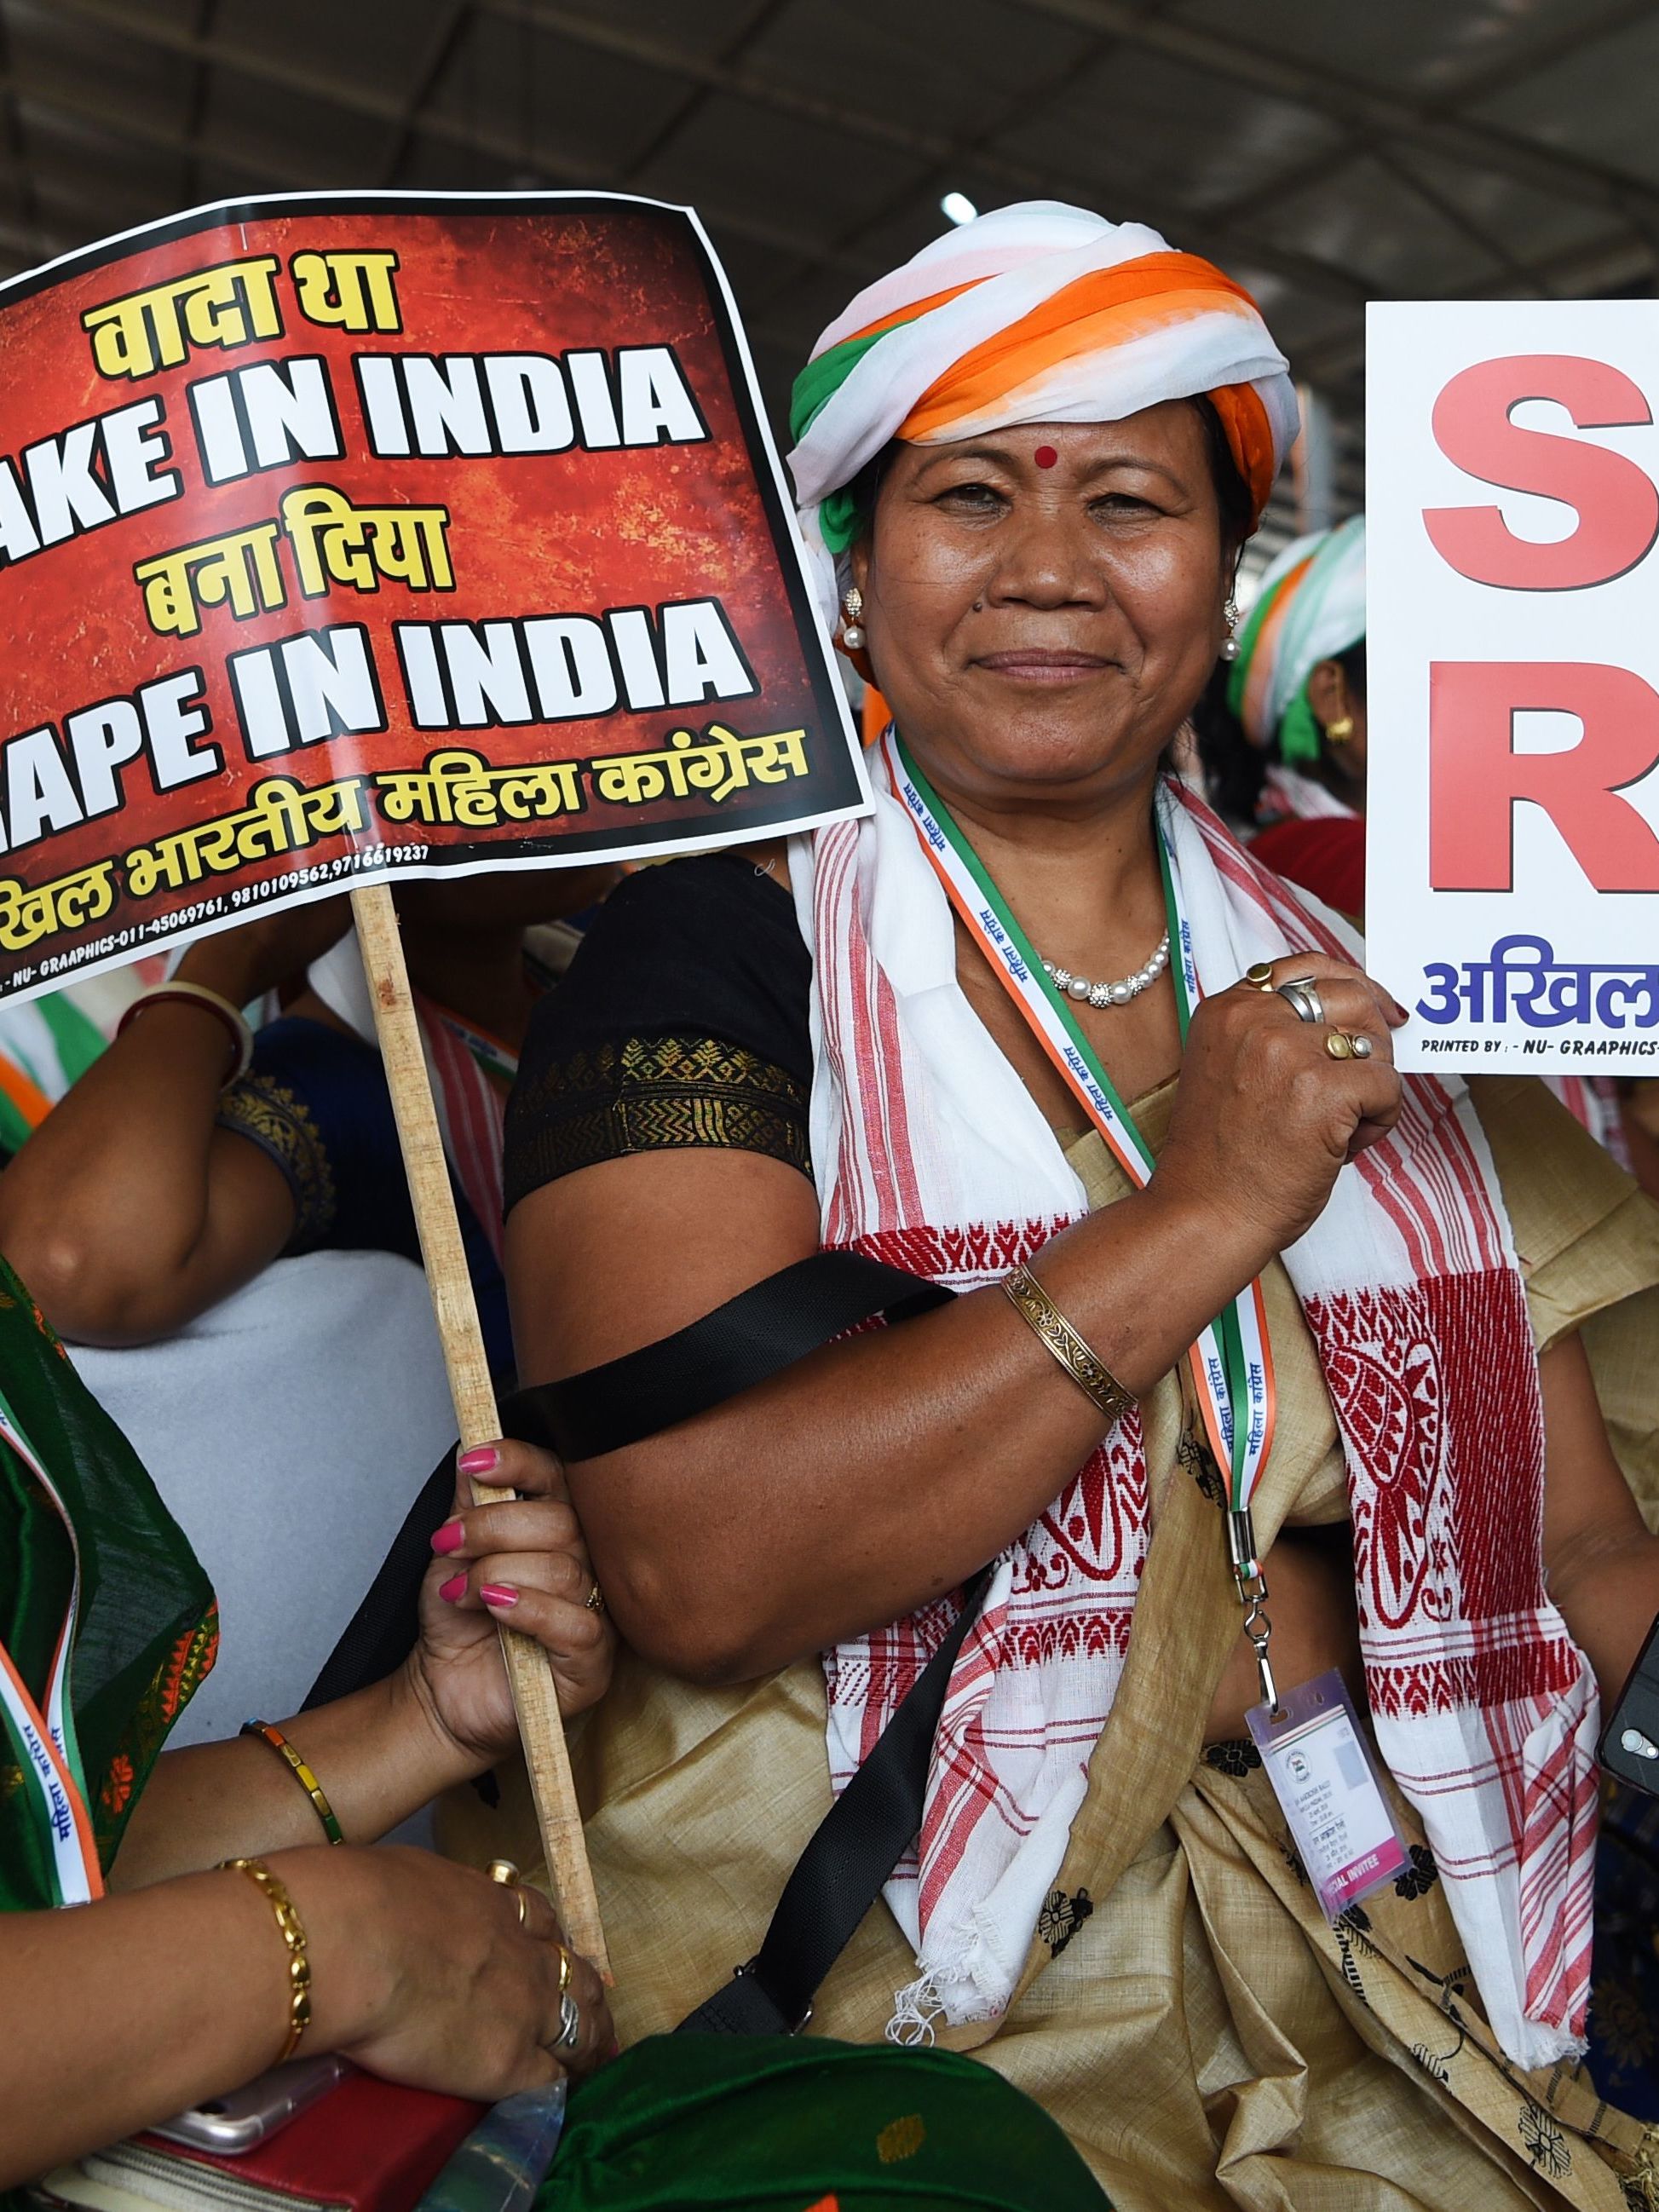 Rape Momxxx - India launches sex offenders registry, amid spate of rape cases | CNN